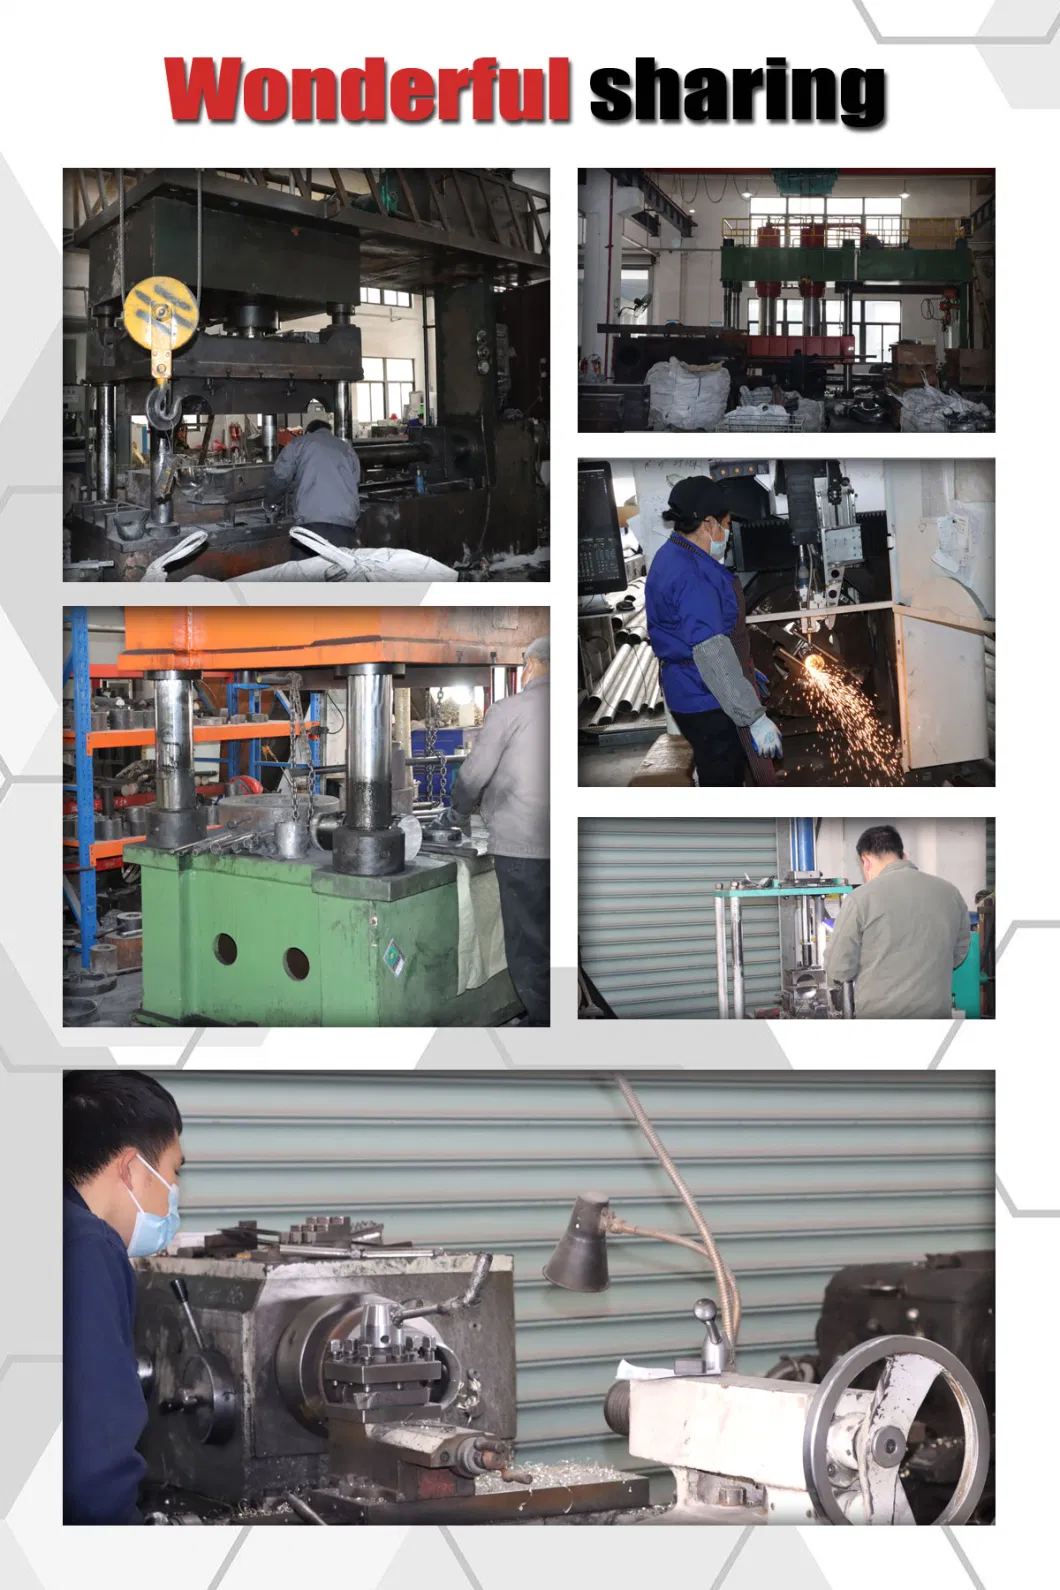 Stainless Steel Industrial Anti-Corrosion Clamps Self-Priming Booster Pump for Water Treatment